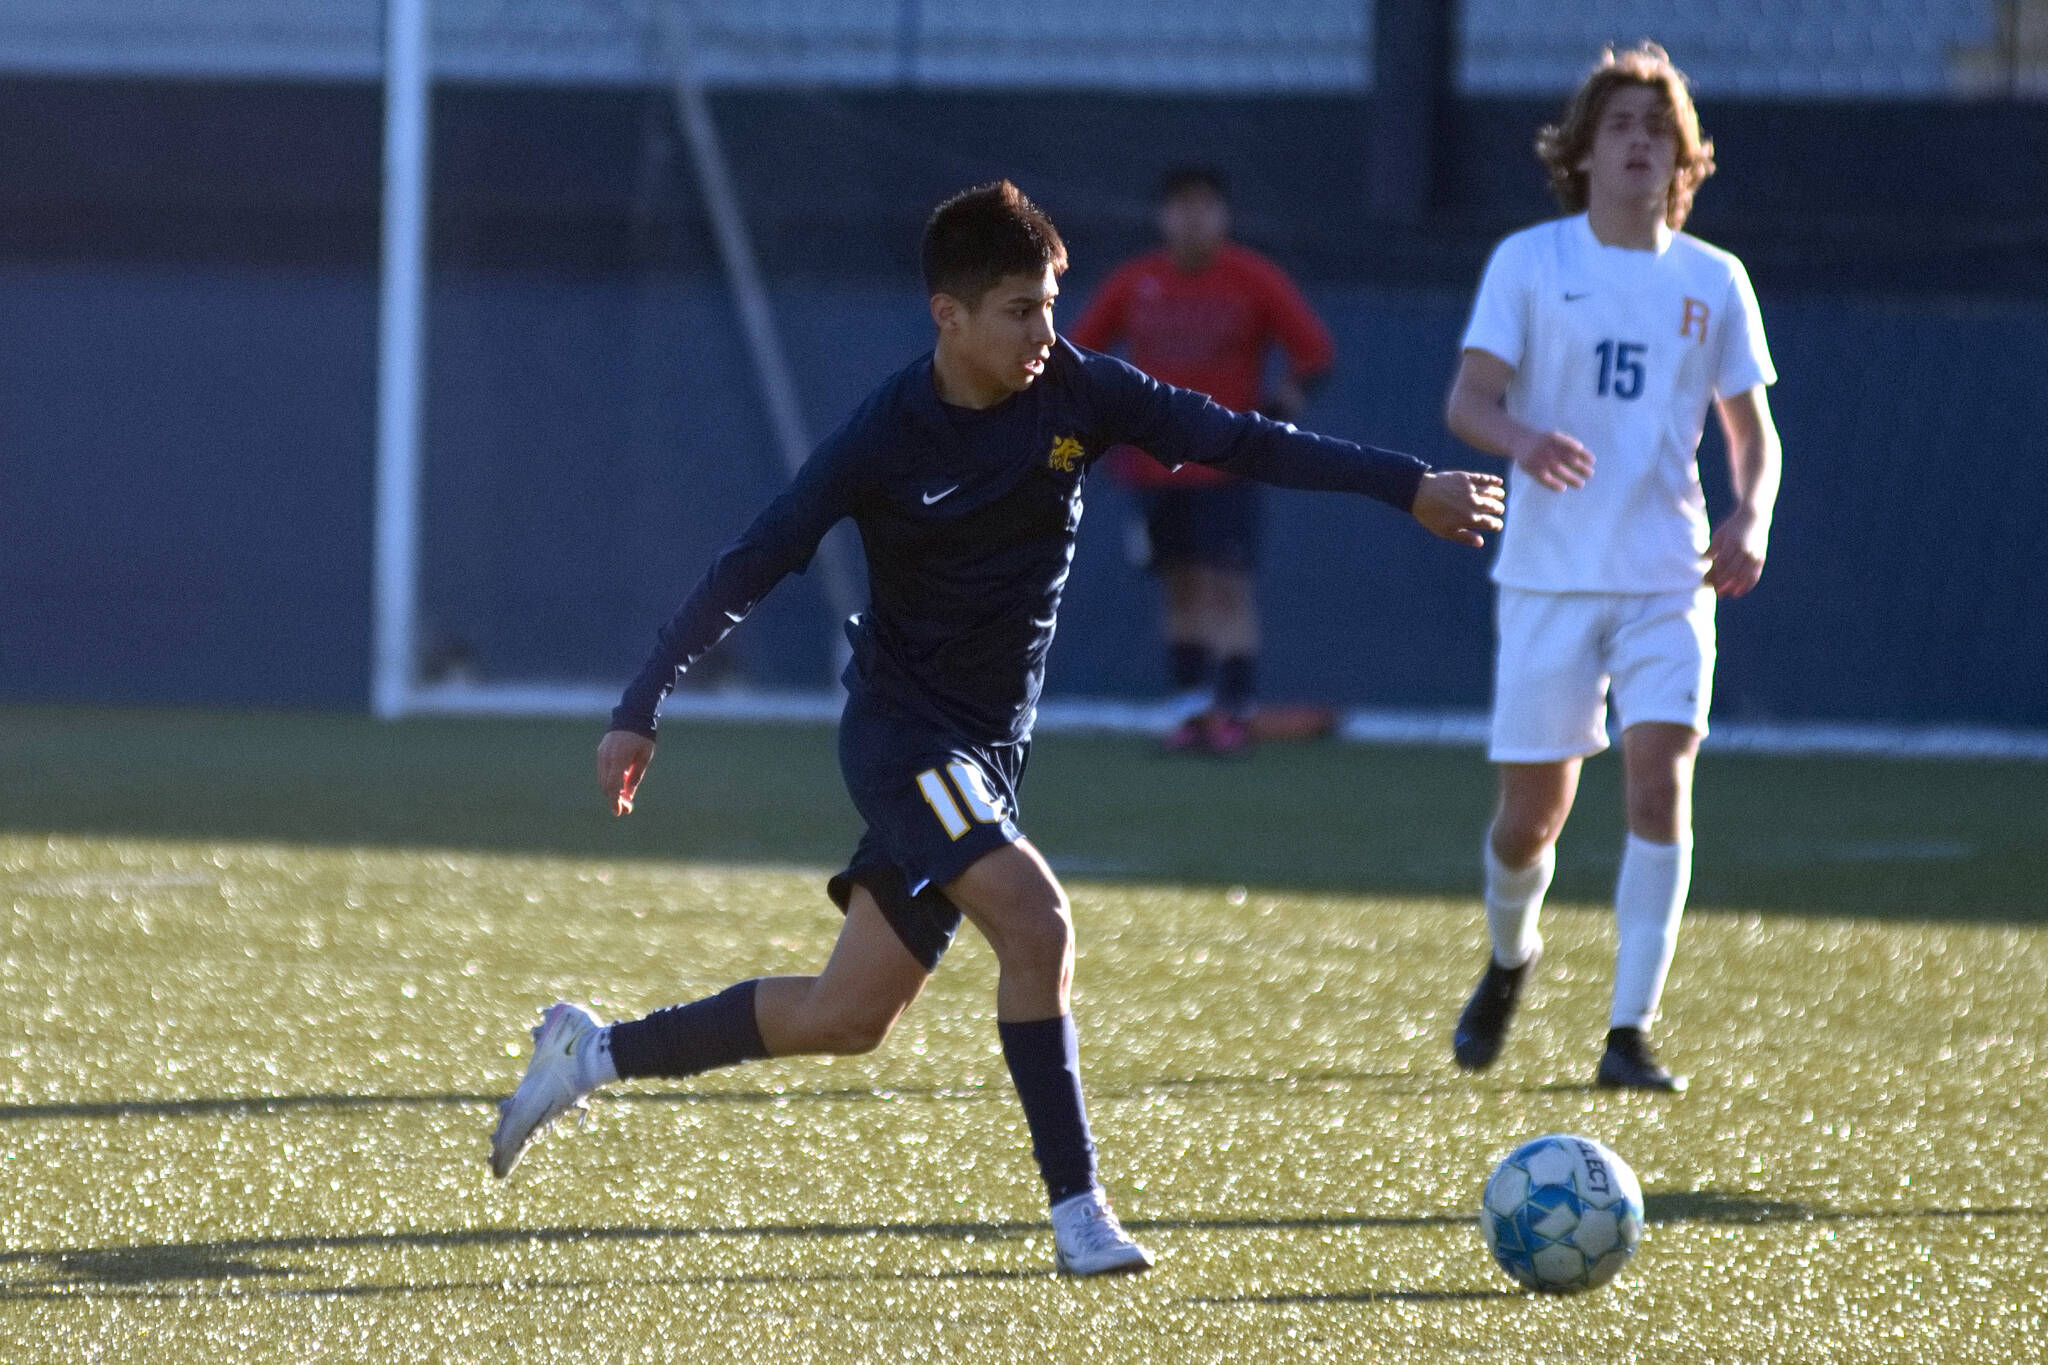 DAILY WORLD FILE PHOTO
Aberdeen junior midfielder Edwin Quintana (10) was one of three Bobcats named to the 2A Evergreen Conference All-League First Team on Monday.